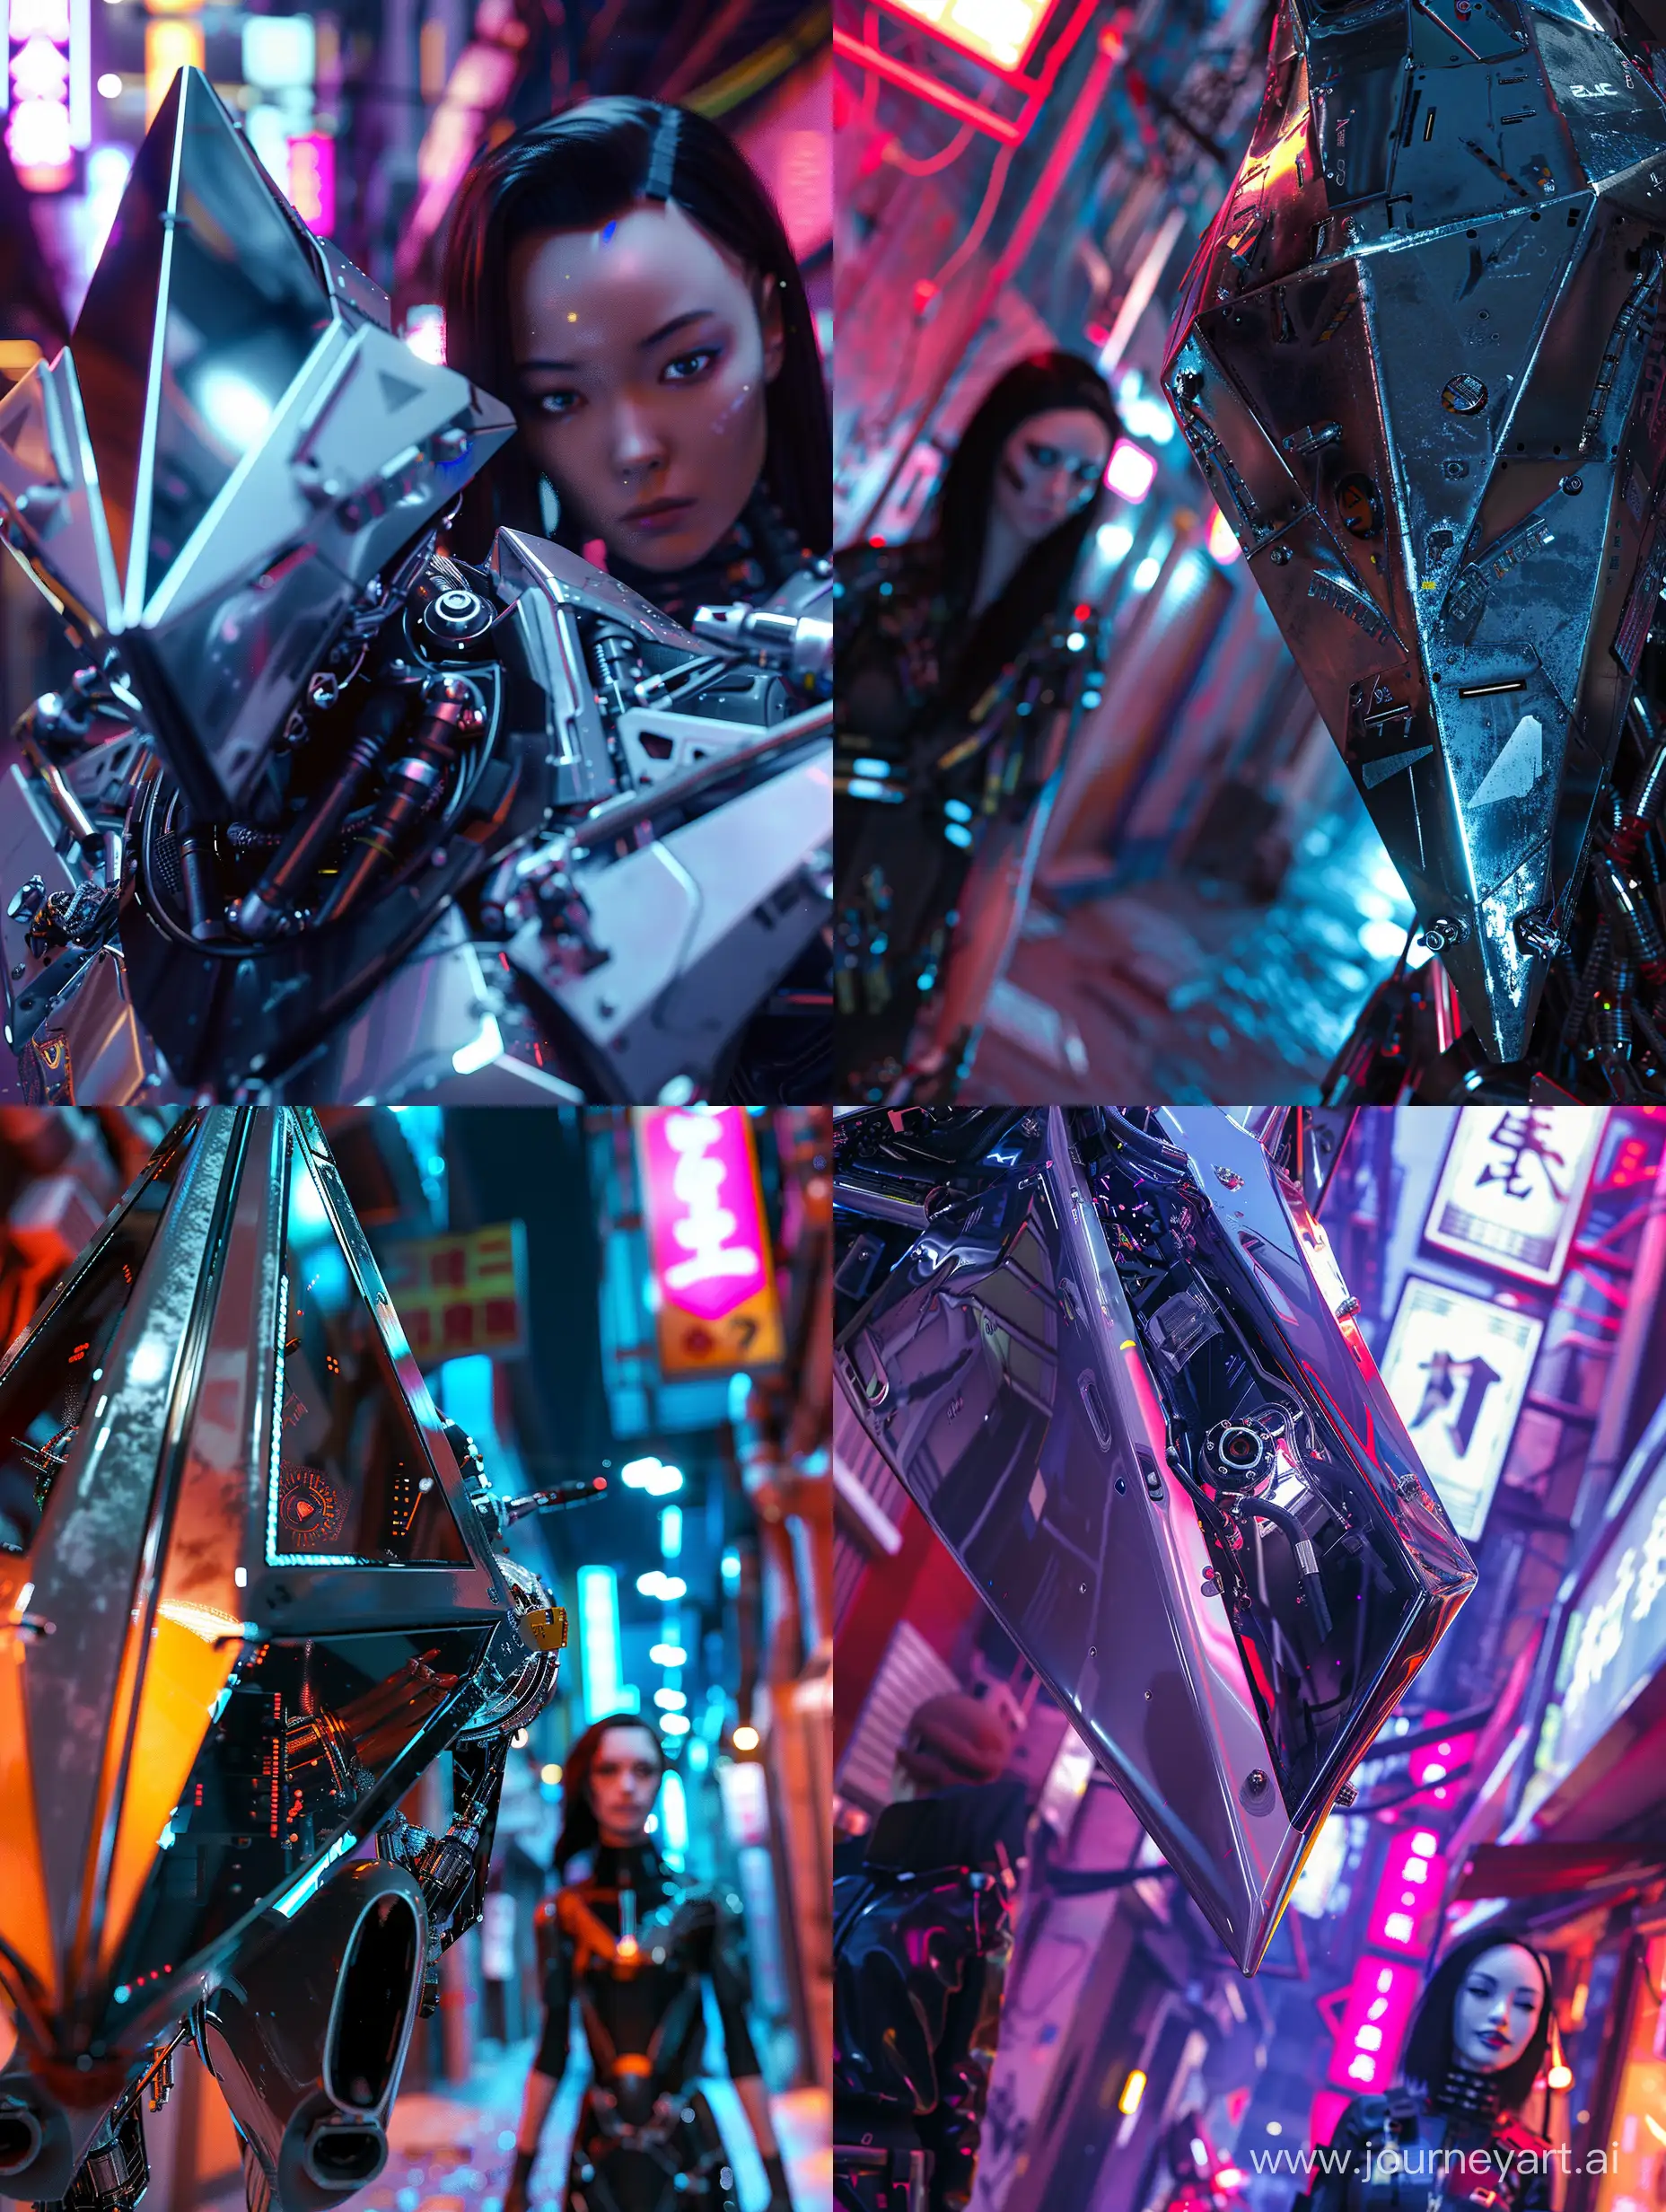 a close up dynamic scene where a  metallic   triangular faced advanced killer drone alongside a cyber punk female  black ops soldier pstanding amidst a neonatal city street alley,Volumetric lighting casts dramatic shadows, enhancing the ultra-realistic cinematography and the  drone armor is adorned with intricate cyberware , seamlessly integrating advanced cybernetic enhancements. Advanced weaponry, including energy and projectile launchers, are seamlessly integrated into the design